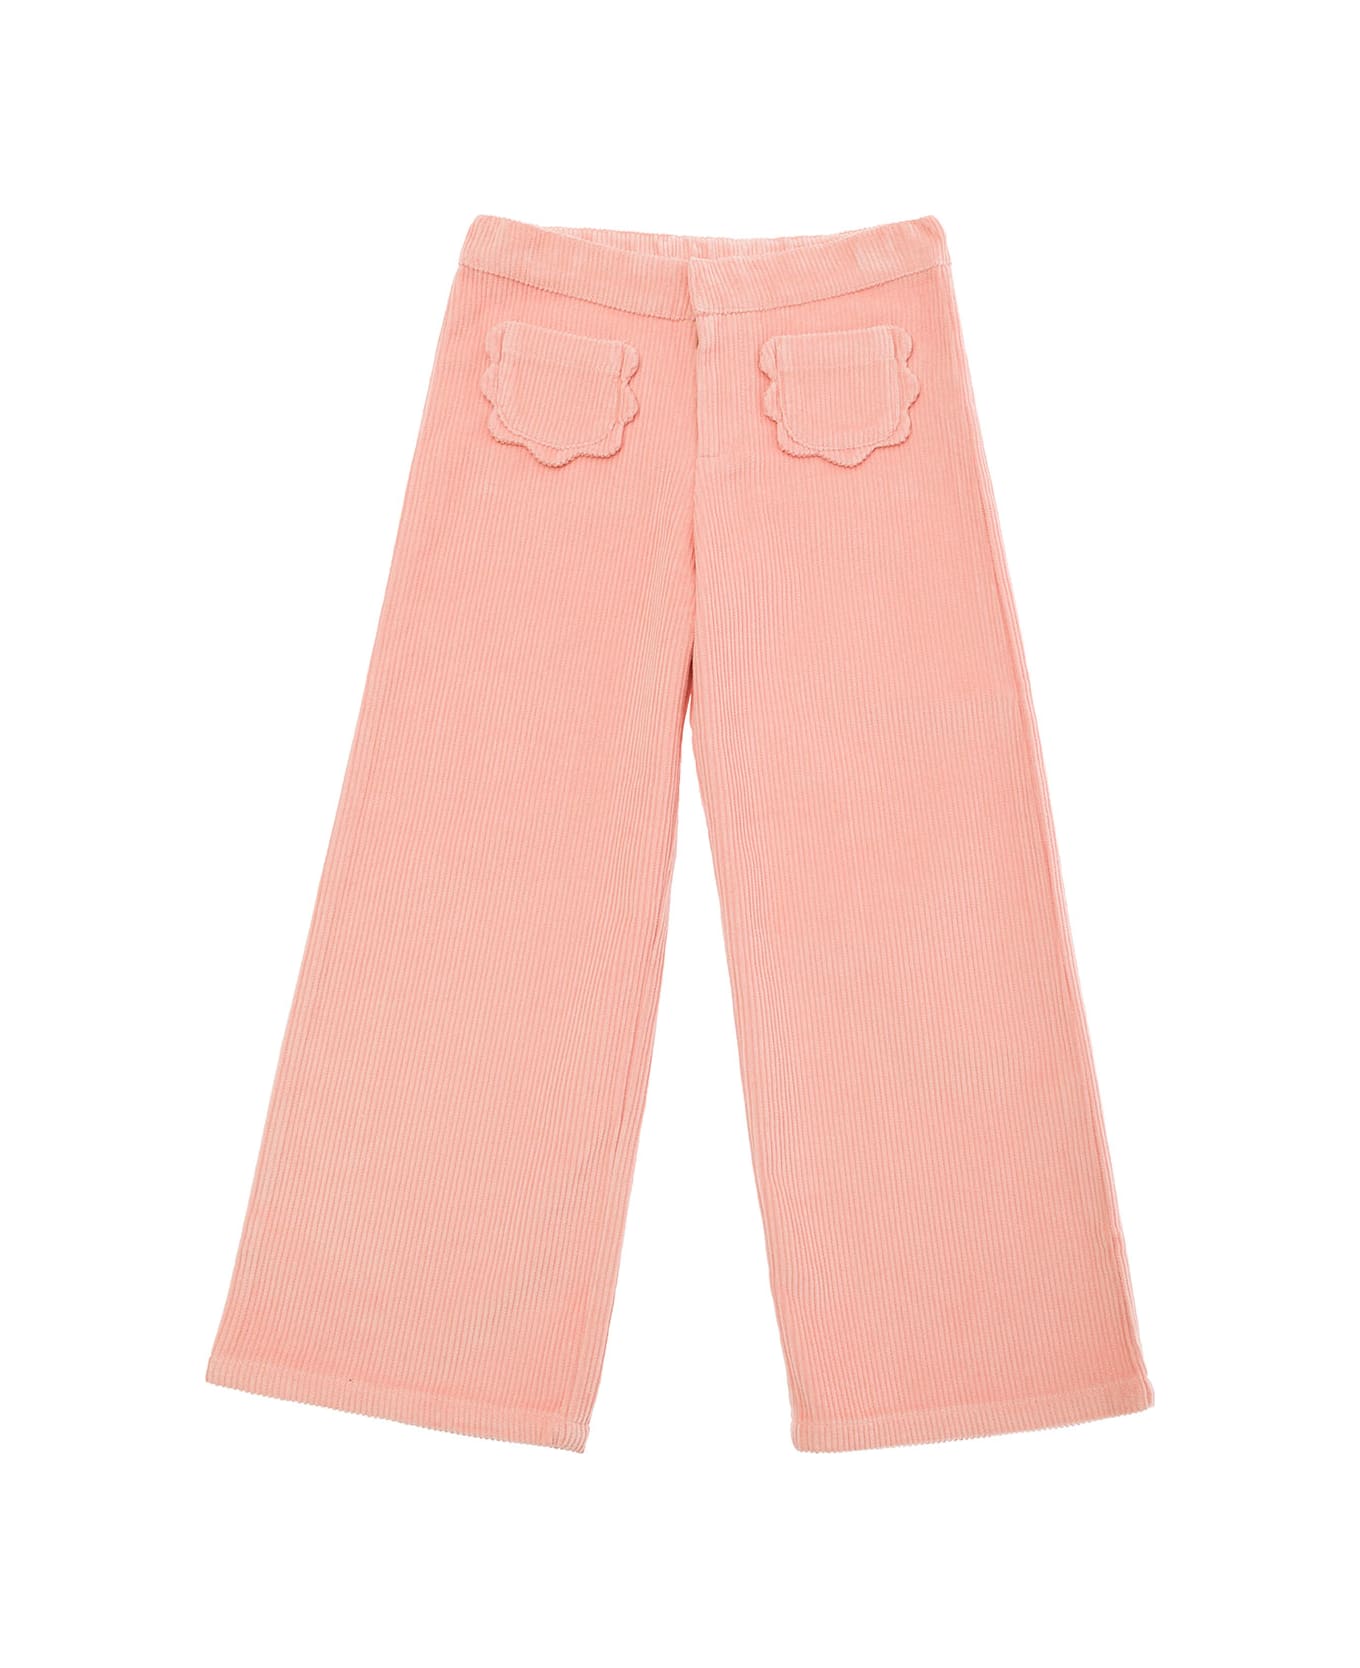 Emile Et Ida Pink Pants With Concealed Closure And Patch Pockets In Corduroy Girl - Pink